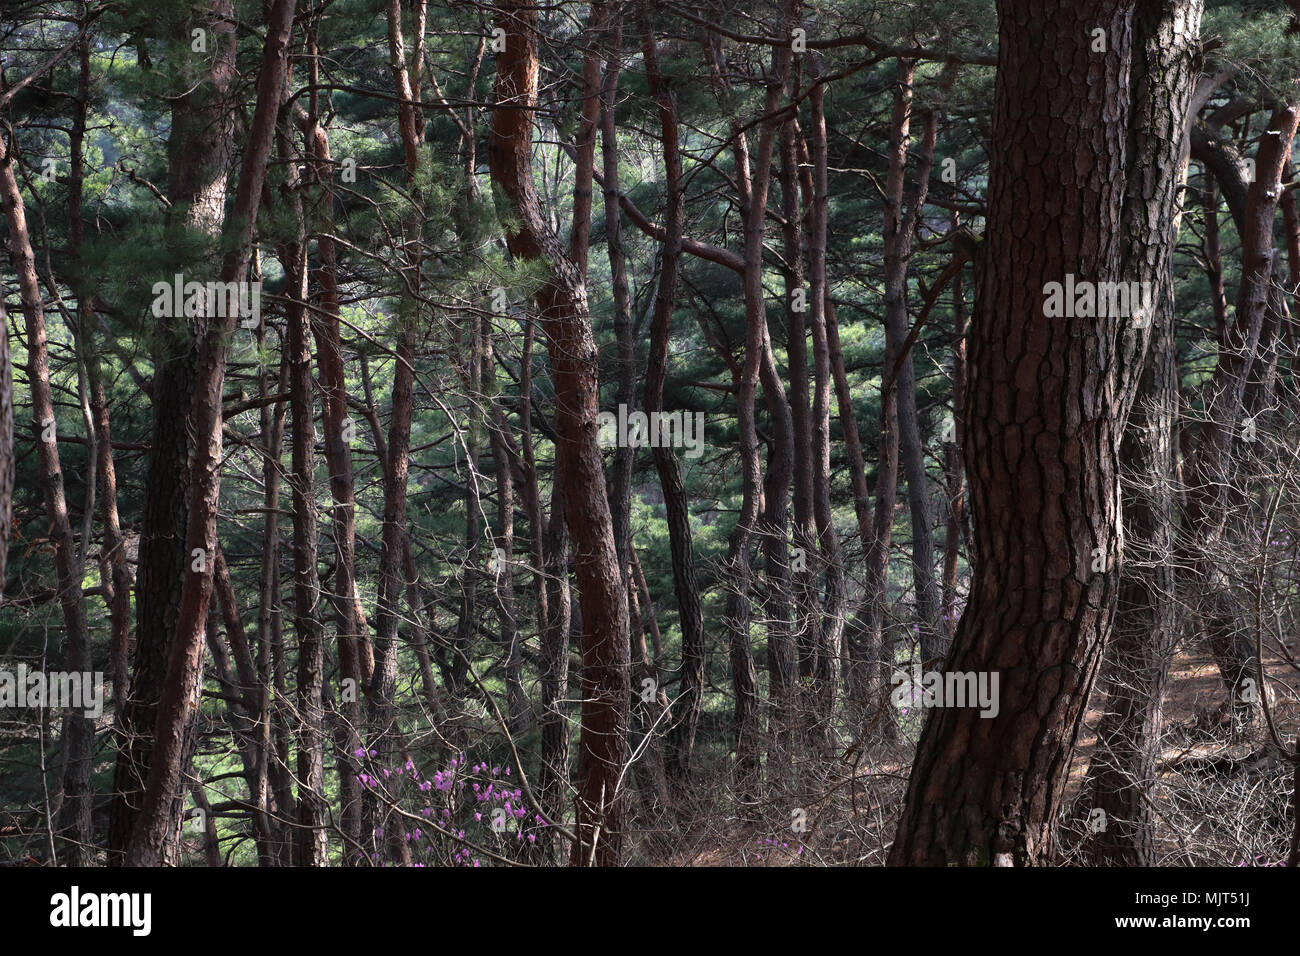 Looking through the red pine forest on the grounds of the Donghwasa Temple in South Korea, the sinuous trunks fill the serene dabbled sunlit view. Stock Photo